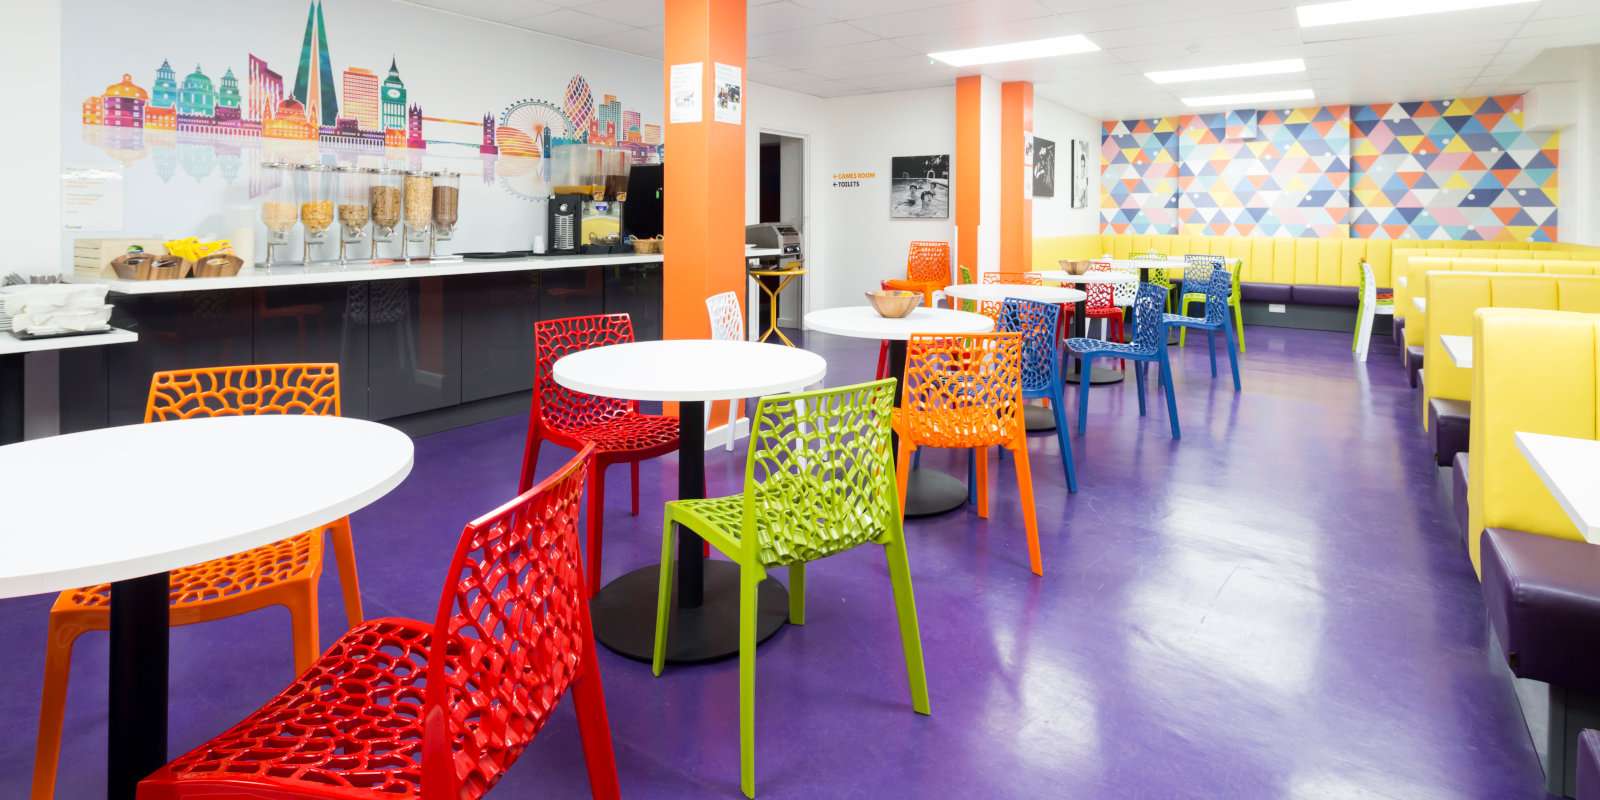 The decor of gay friendly SoHostel in London just screams gay pride with those rainbow colours!